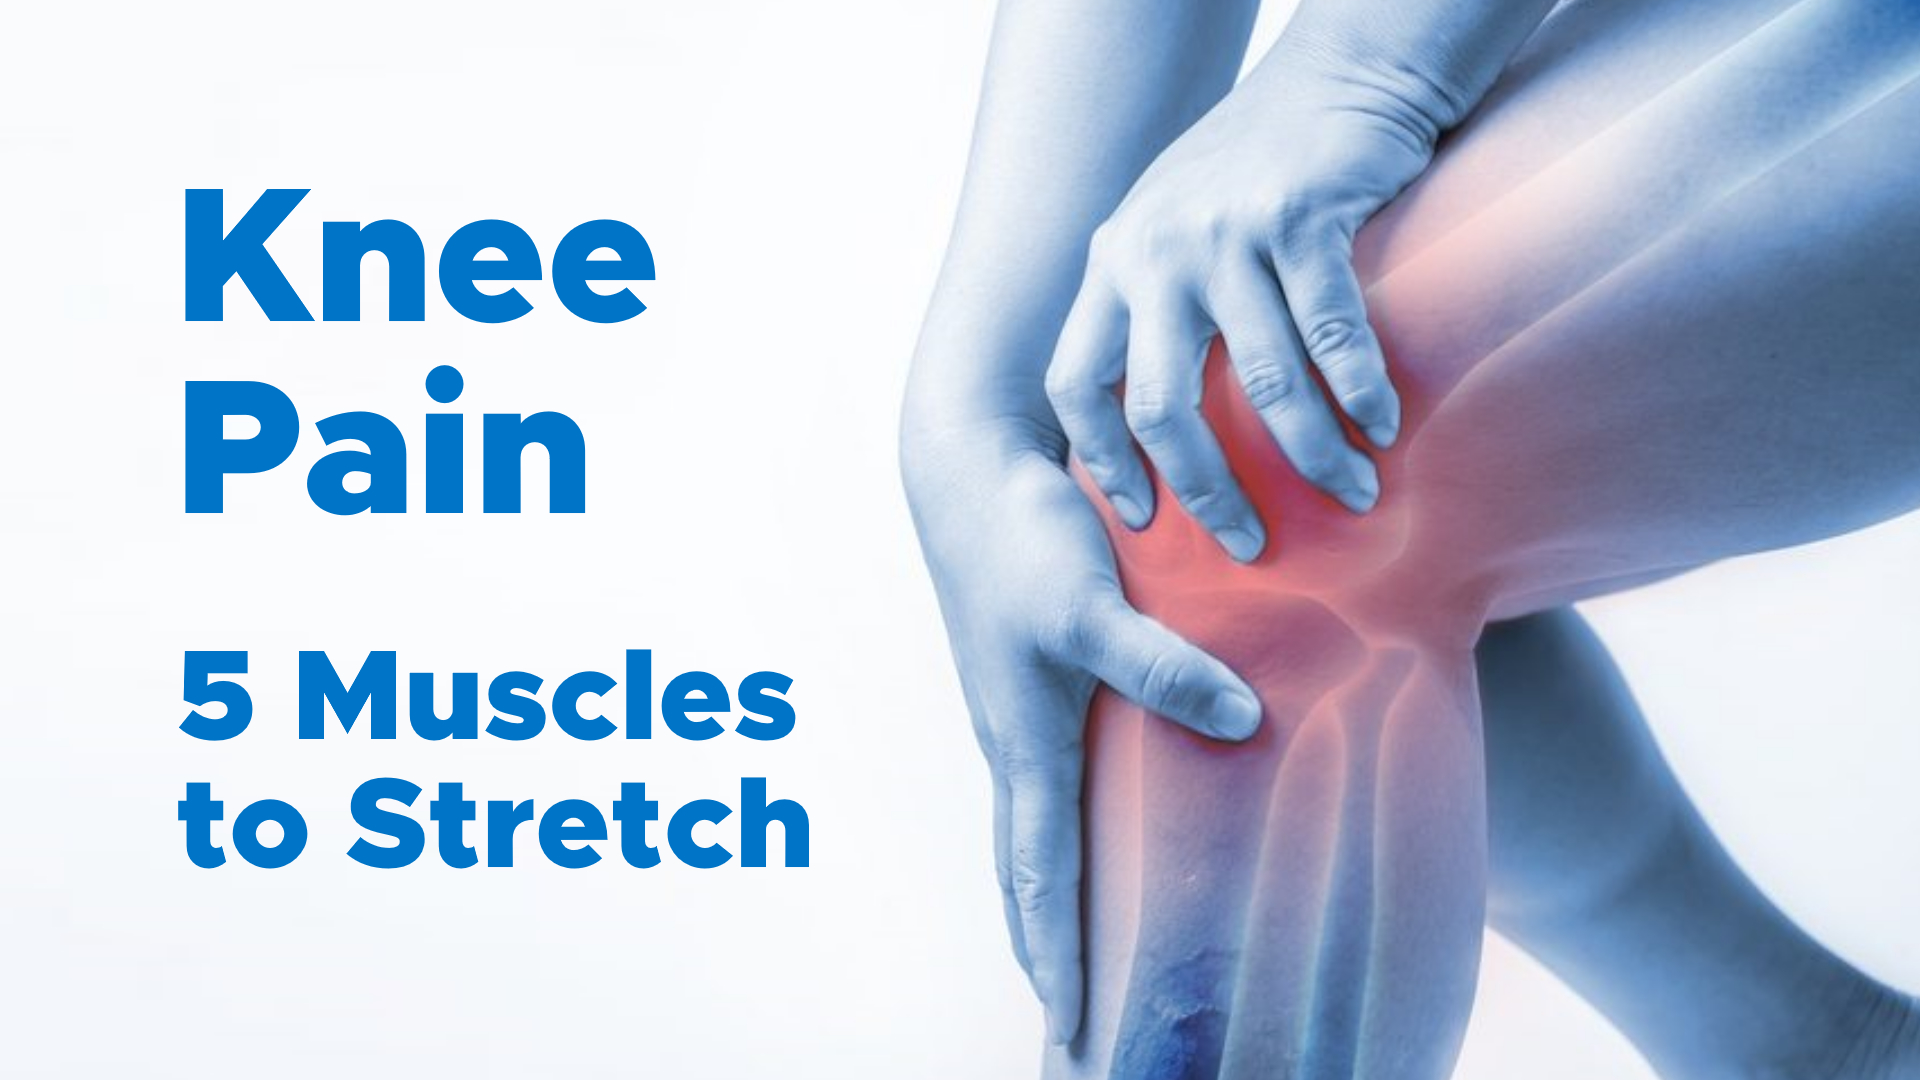 5 Muscles to Stretch to Help Knee Pain and Improve Your Knee Health